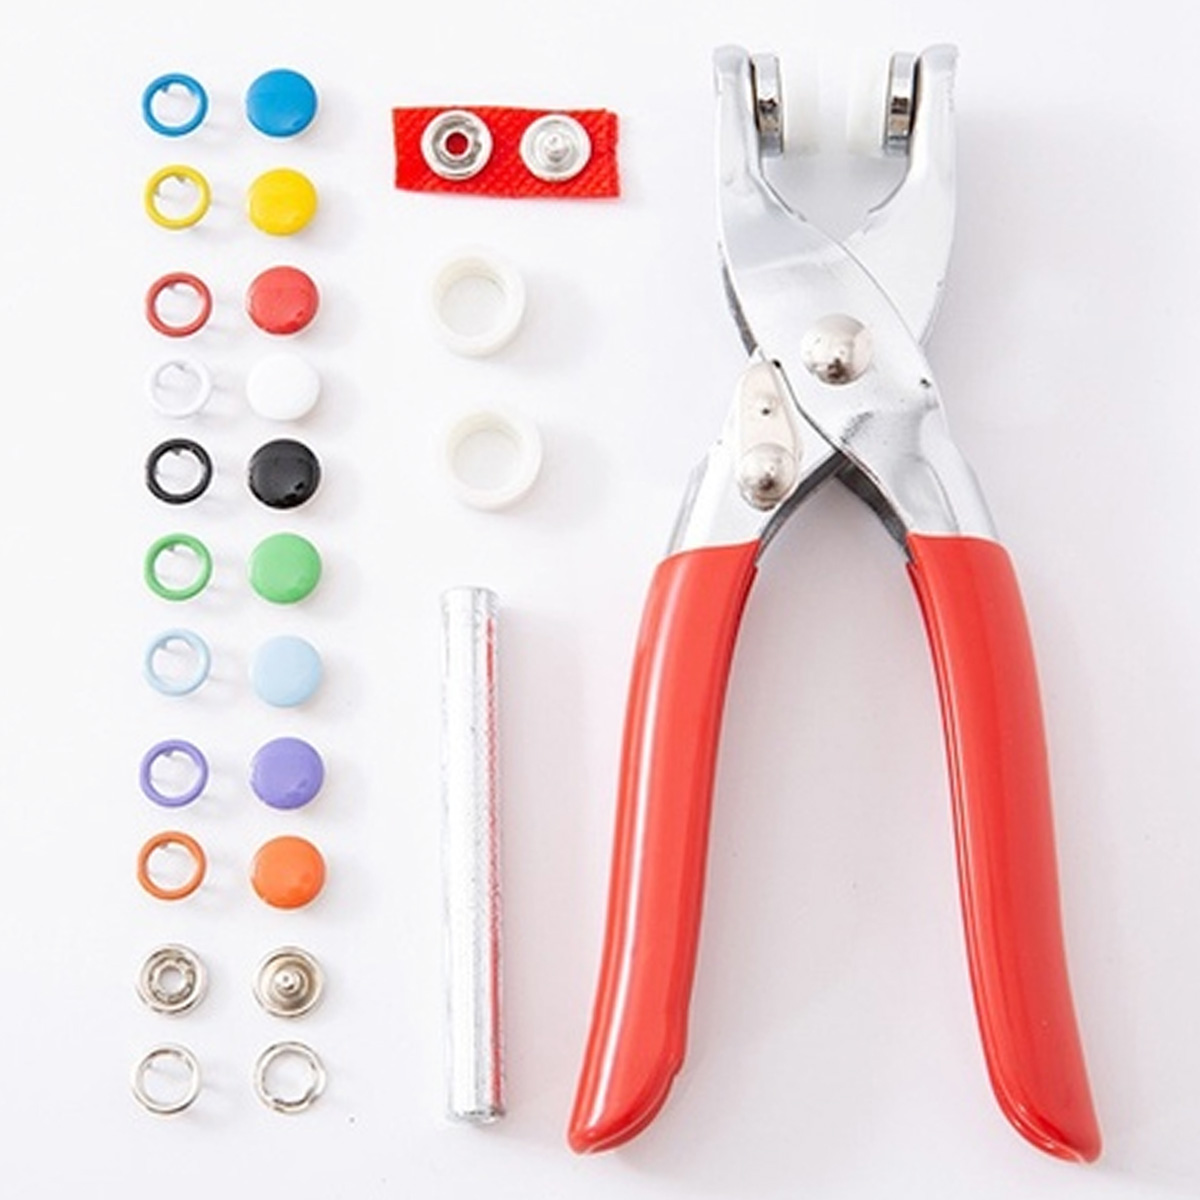 100200-Sets-DIY-Press-Studs-Tools-Kit-Assorted-Colors-Snap-Metal-Sewing-Buttons-1618875-7